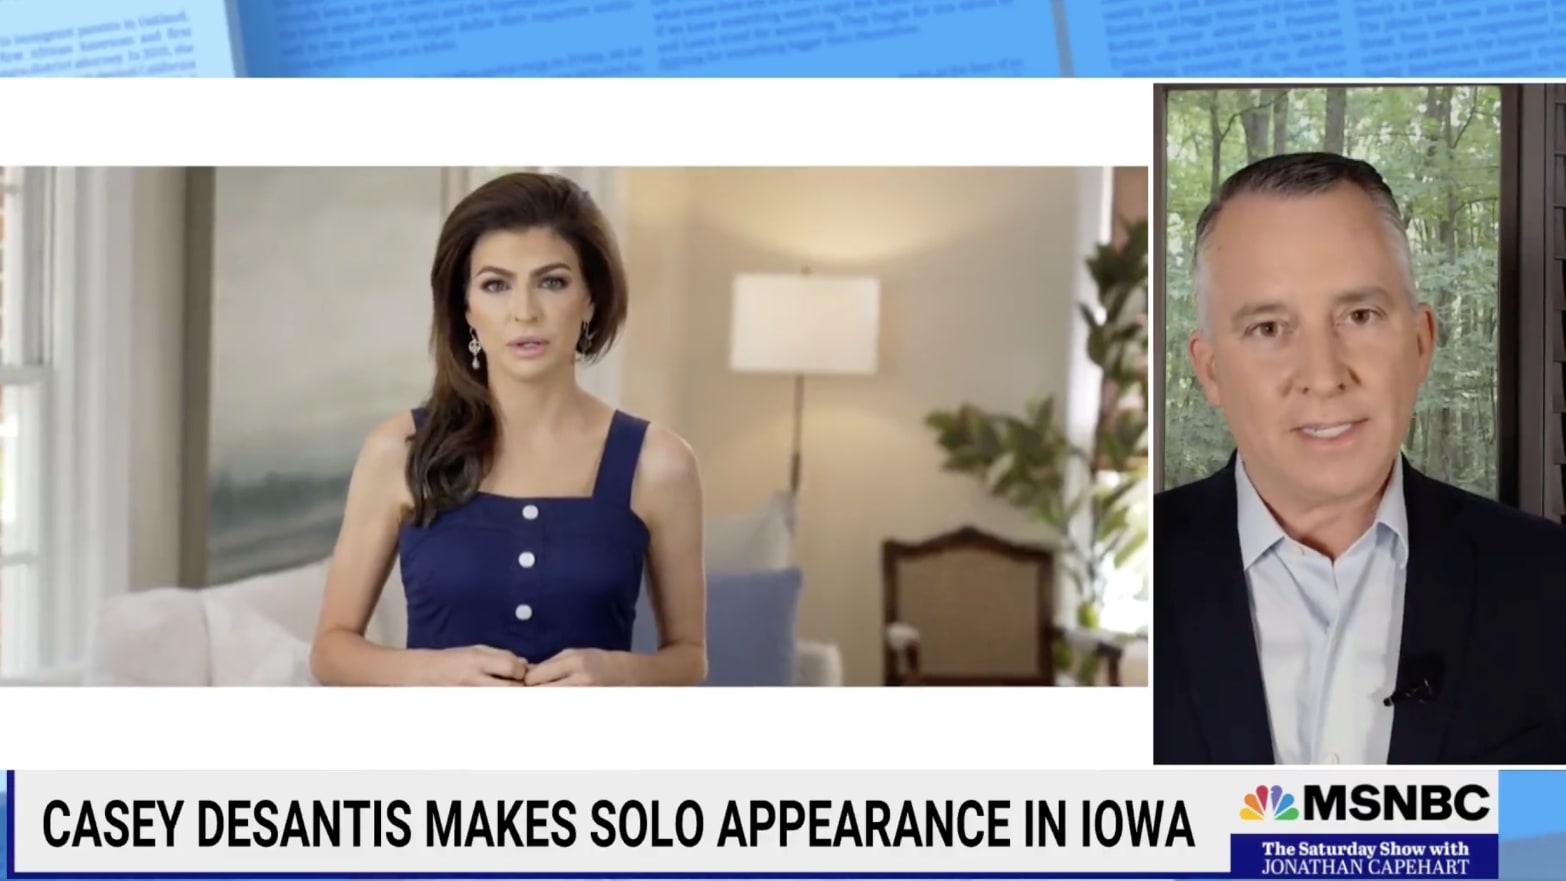 An MSNBC panel had some strong words for Florida’s First Lady, Casey DeSantis.